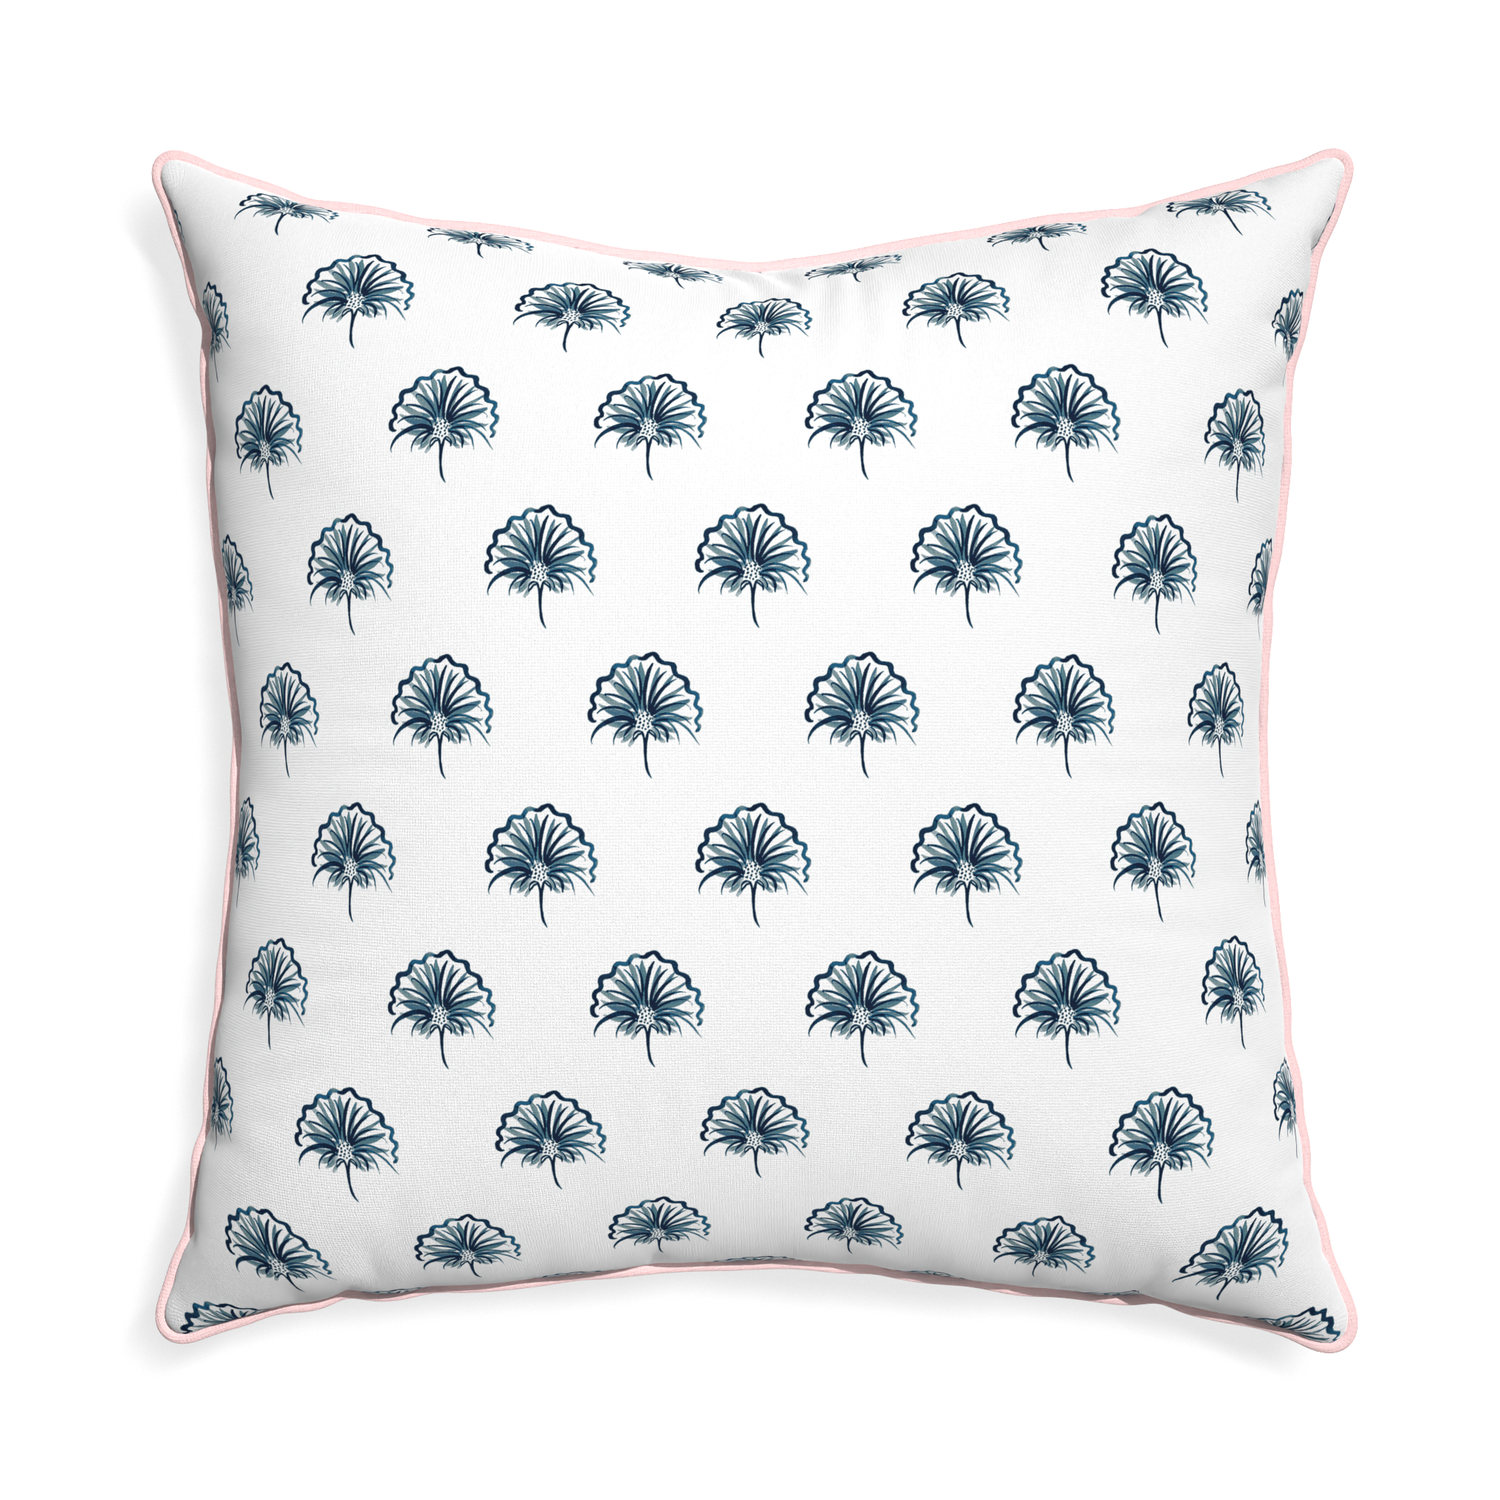 Euro-sham penelope midnight custom pillow with petal piping on white background